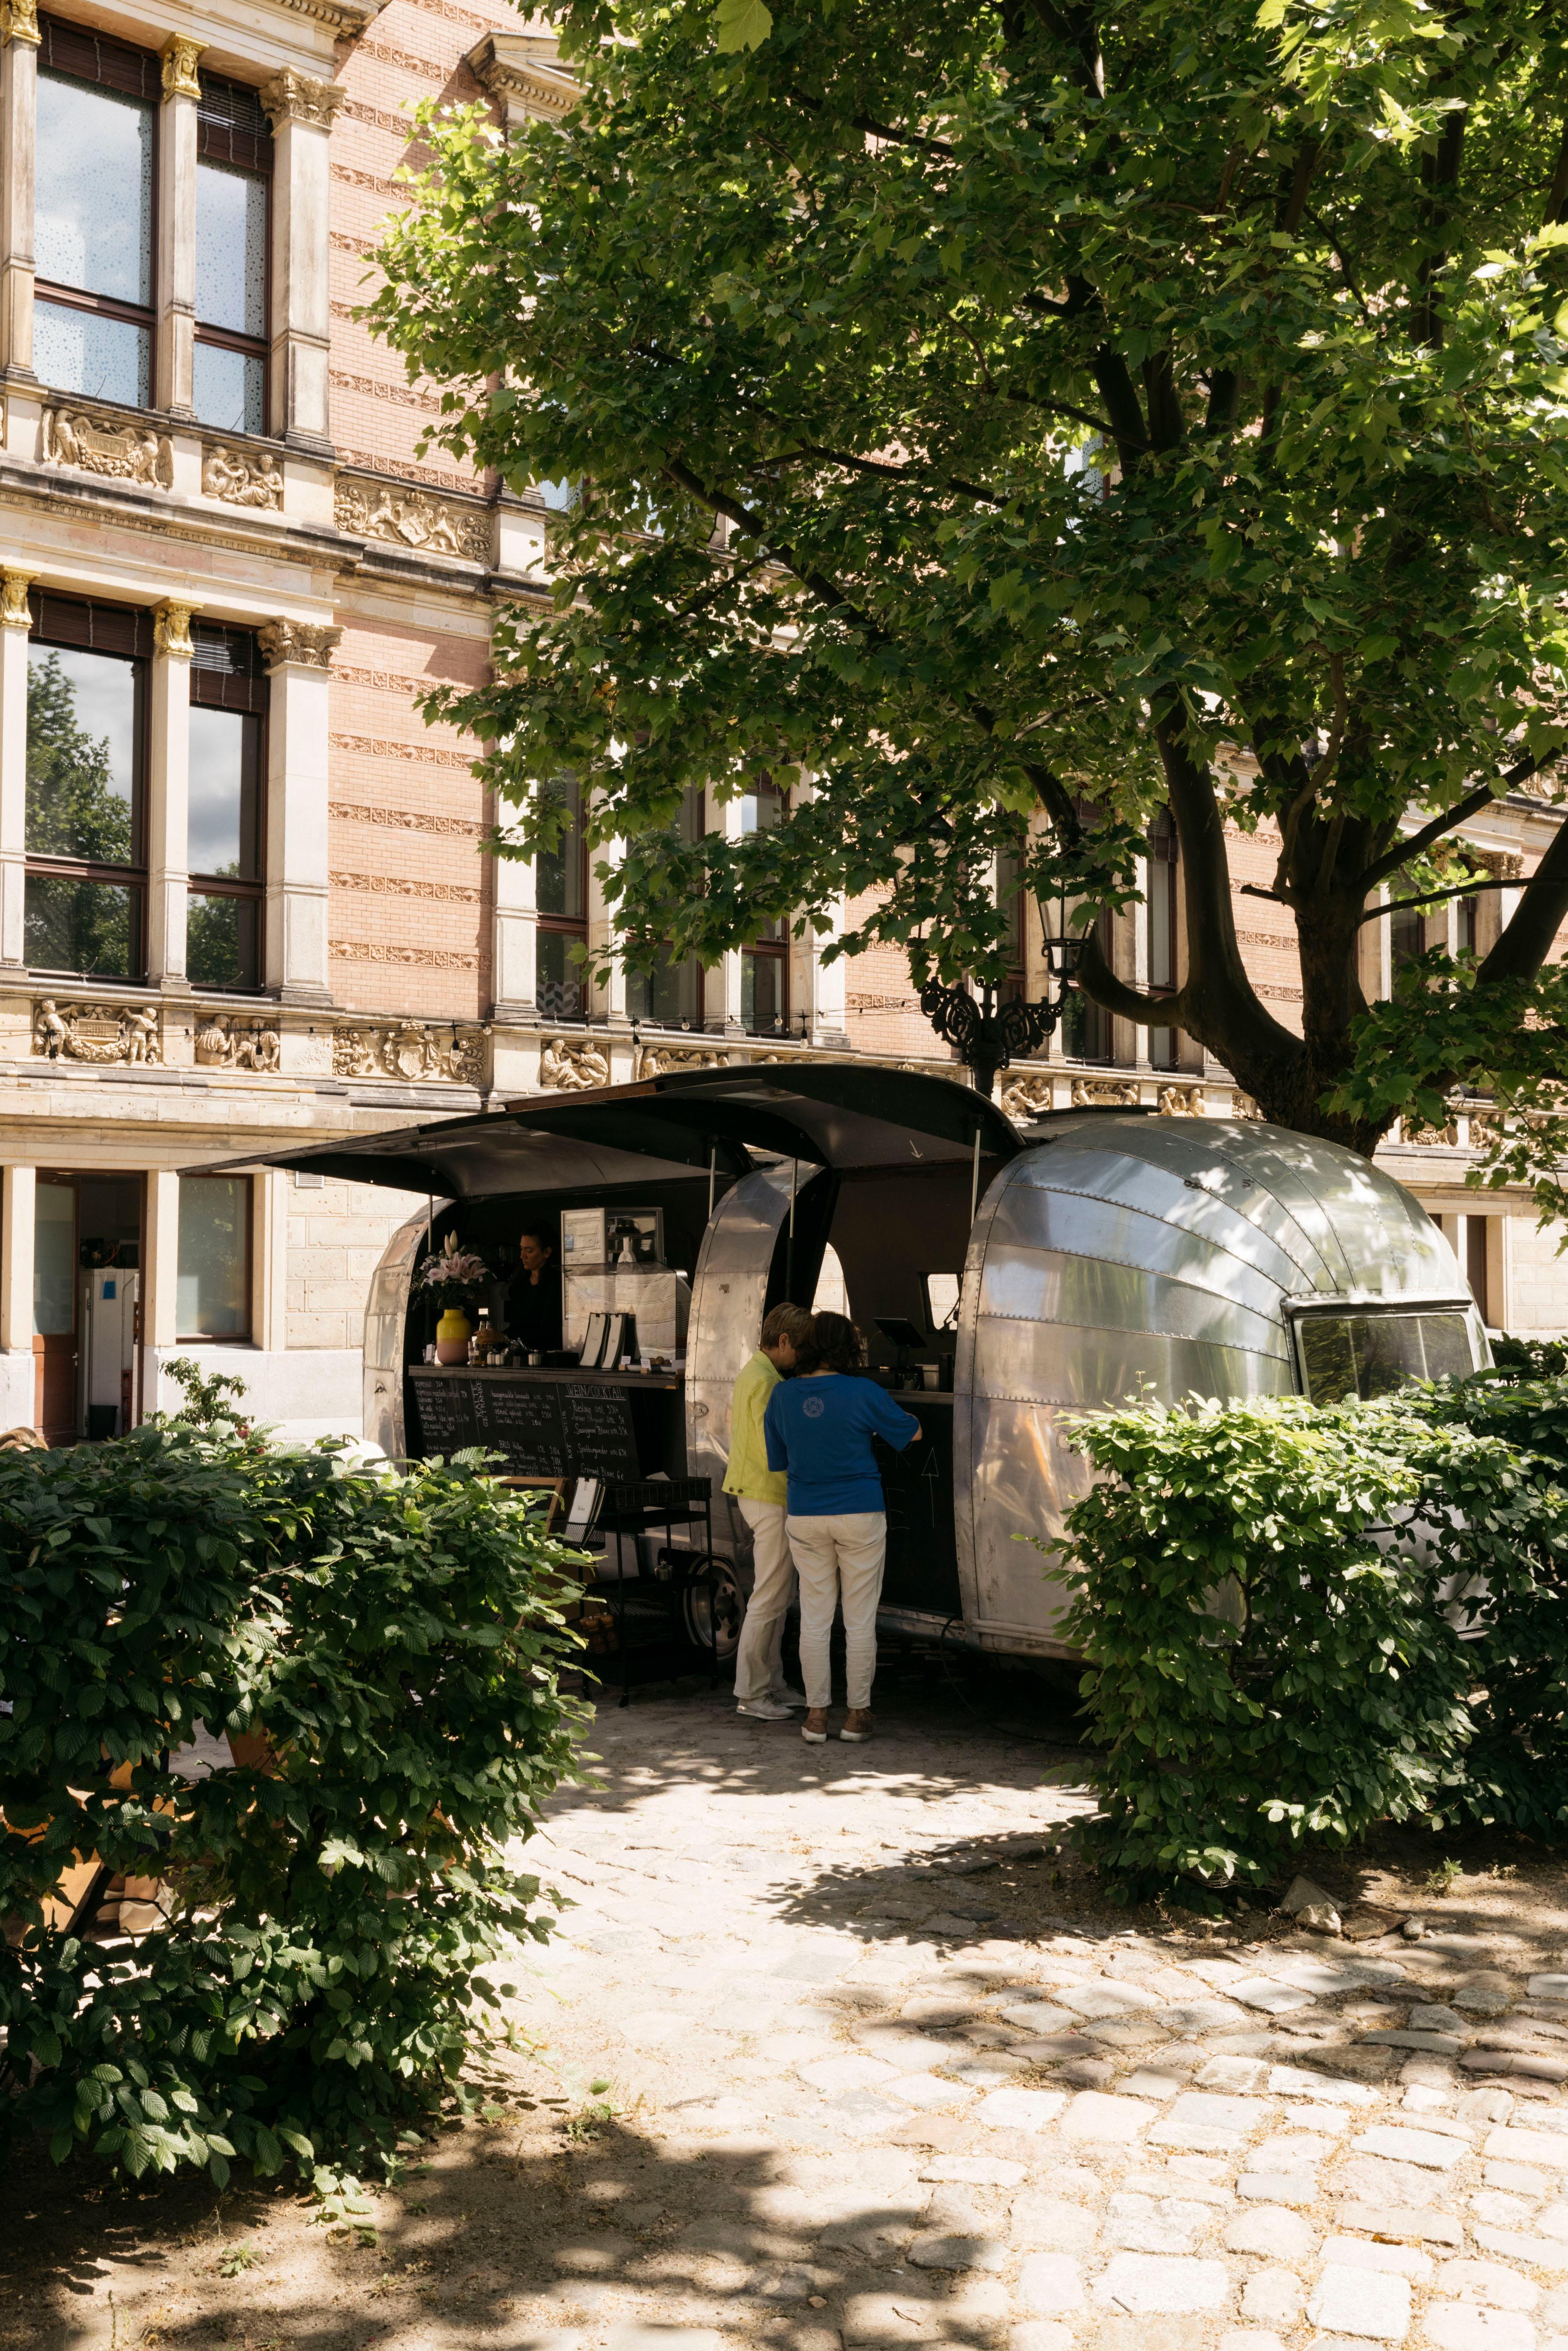 The food truck of the Beba restaurant next to the building of the Gropius Bau.